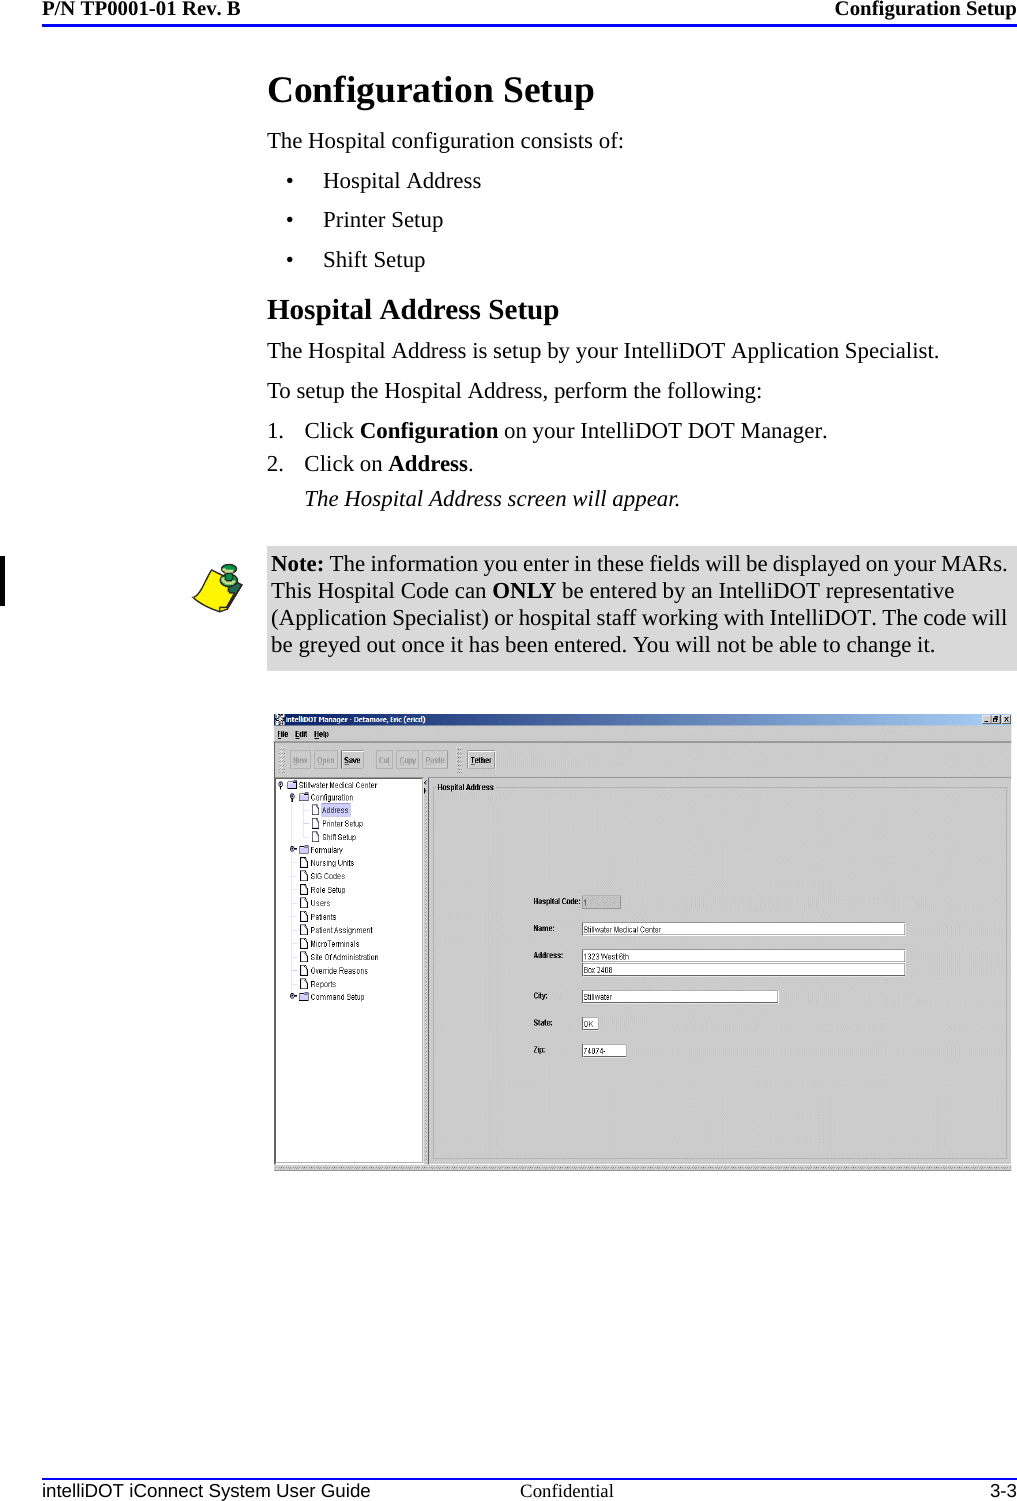 P/N TP0001-01 Rev. B Configuration SetupintelliDOT iConnect System User Guide Confidential 3-3Configuration SetupThe Hospital configuration consists of:• Hospital Address•Printer Setup•Shift SetupHospital Address SetupThe Hospital Address is setup by your IntelliDOT Application Specialist.To setup the Hospital Address, perform the following:1. Click Configuration on your IntelliDOT DOT Manager.2. Click on Address.The Hospital Address screen will appear.Note: The information you enter in these fields will be displayed on your MARs. This Hospital Code can ONLY be entered by an IntelliDOT representative (Application Specialist) or hospital staff working with IntelliDOT. The code will be greyed out once it has been entered. You will not be able to change it.